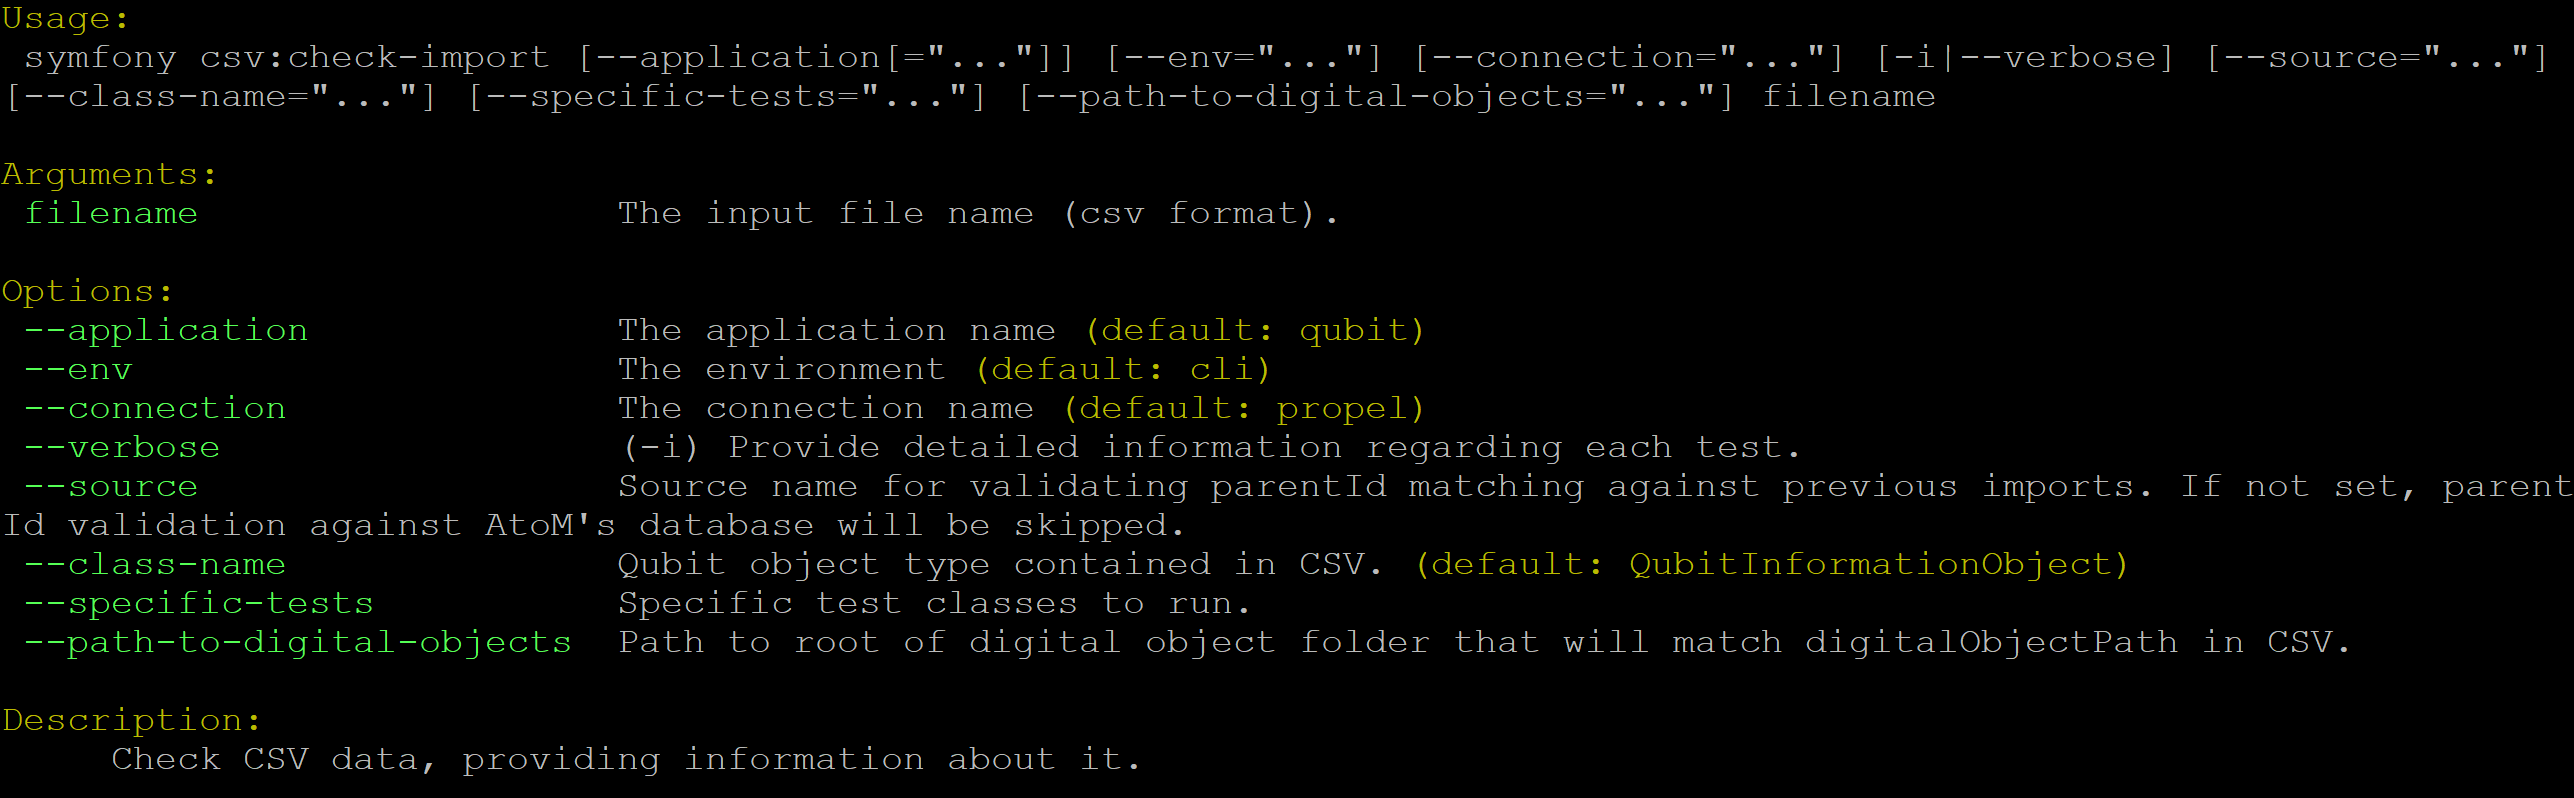 An image of the command-line output for the CSV validation task